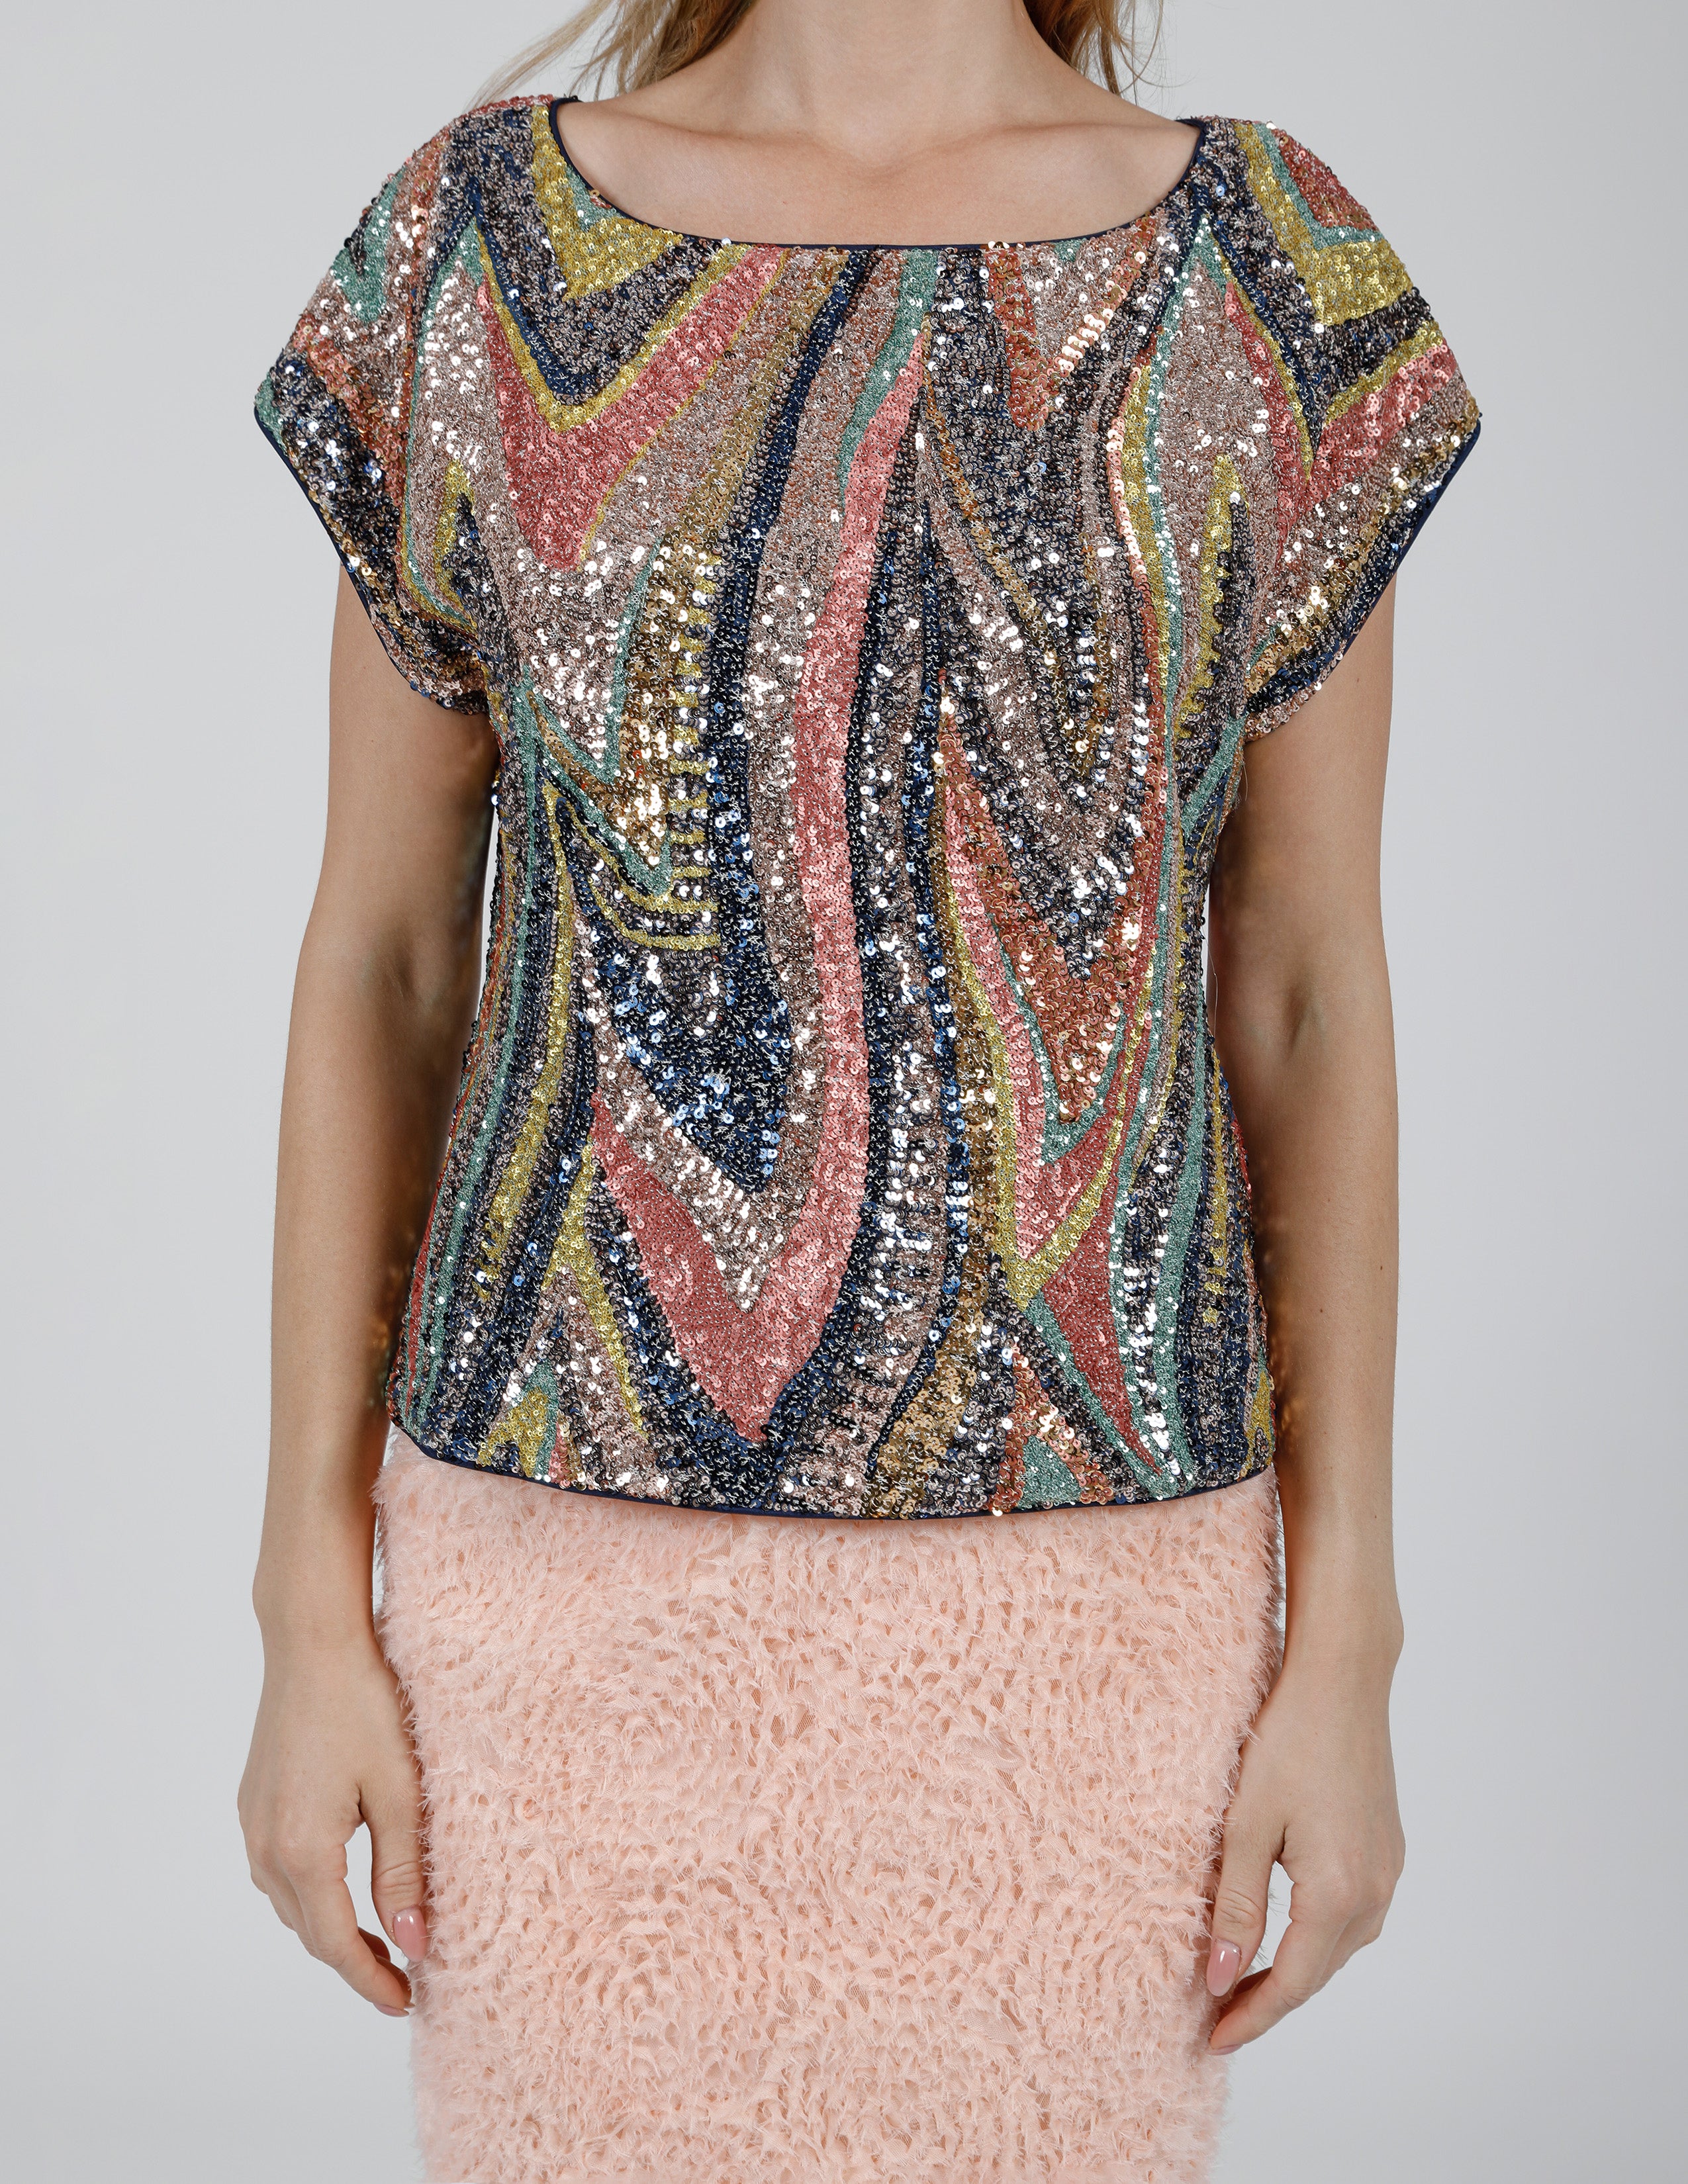 MOULIN ROUGE SEQUINED TOP